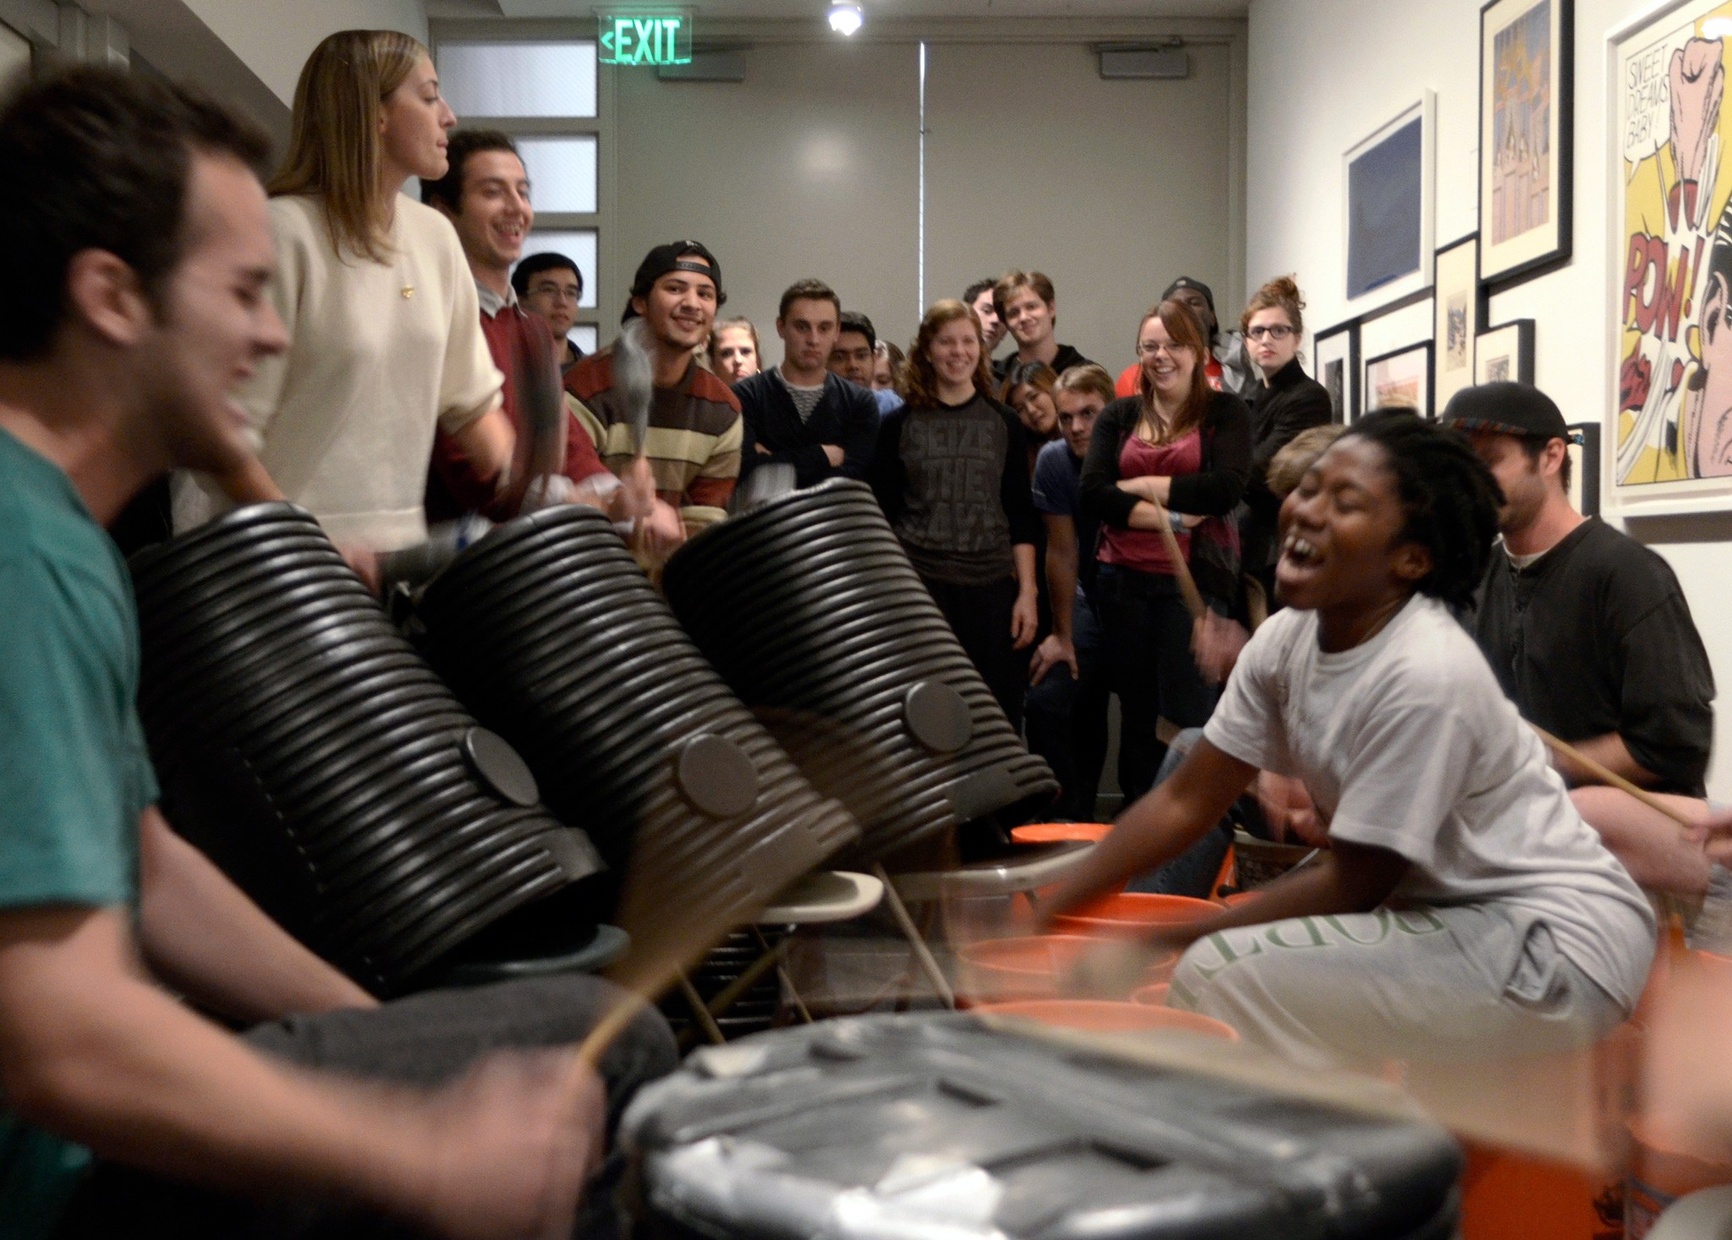 A group of young people bang on different types of cans like drums while a crowd watches from behind them.